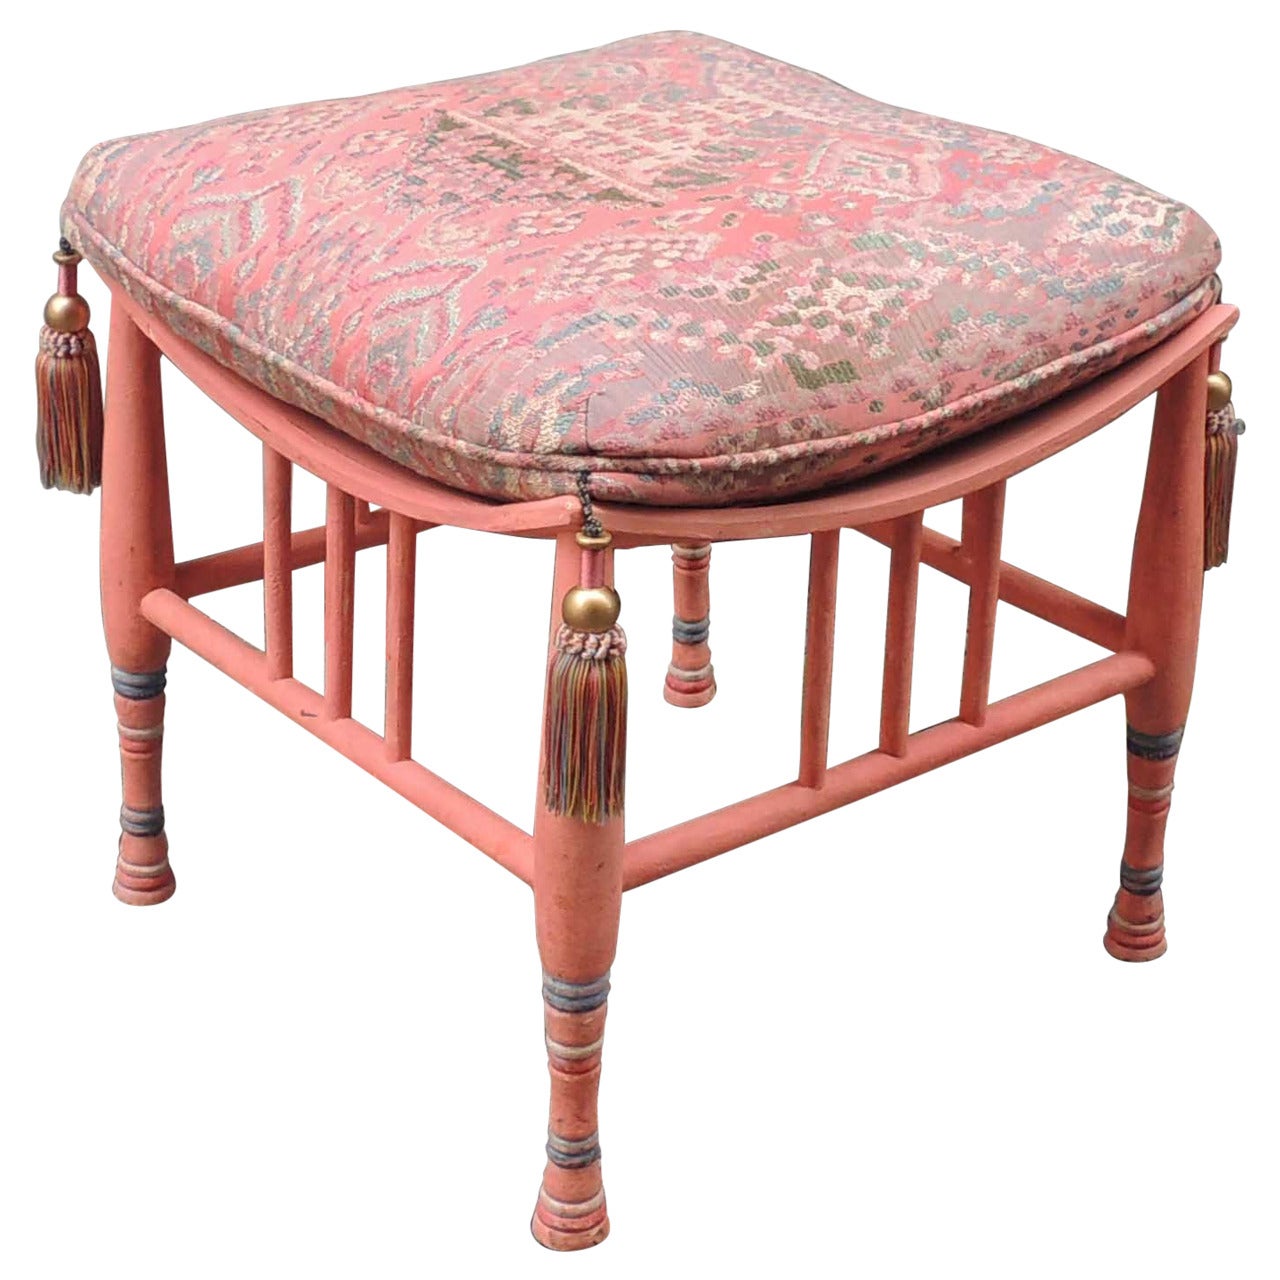 Early 20th C Egyptian Revival Stool or Ottoman